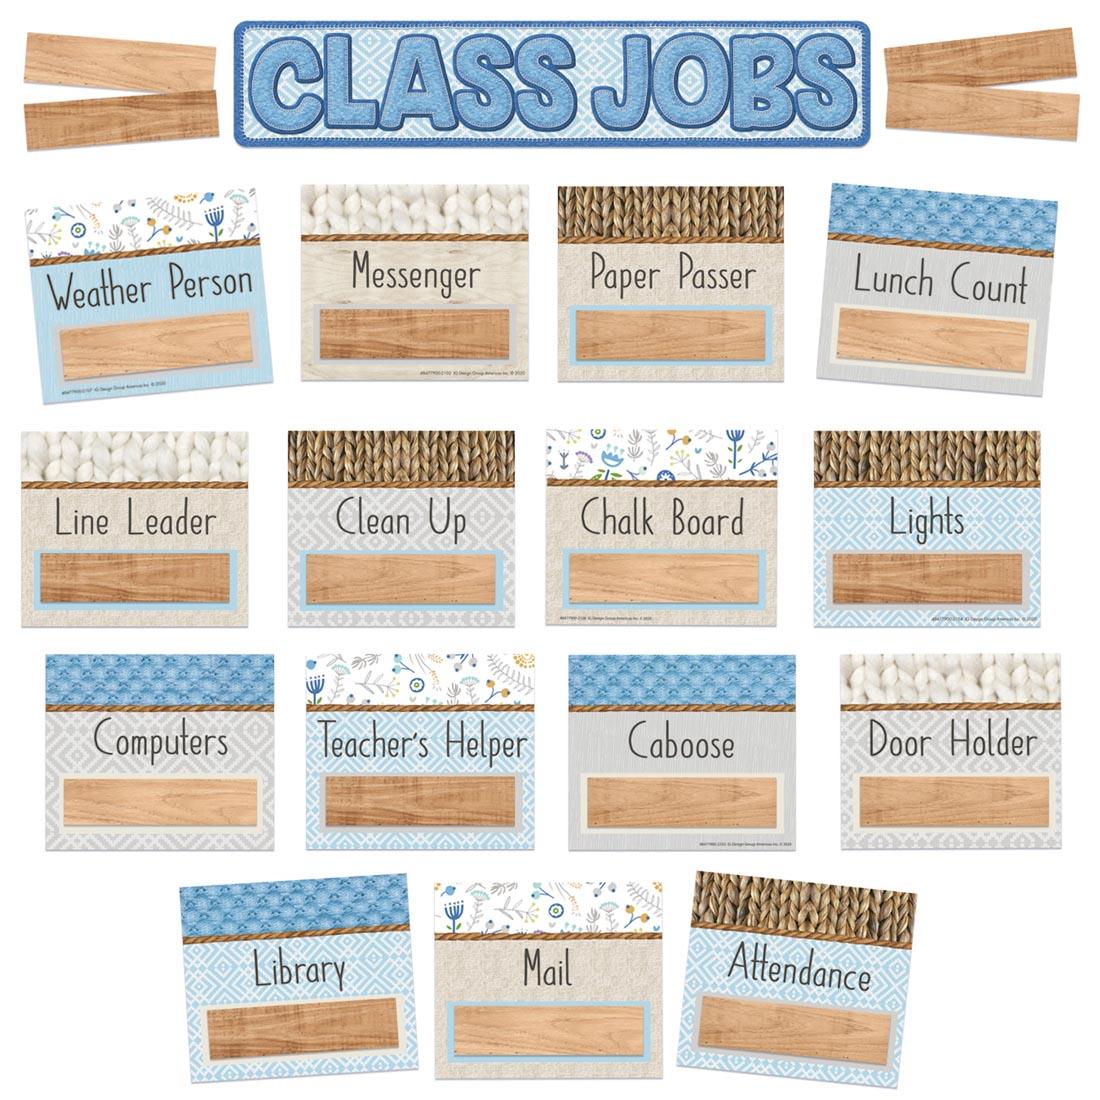 Class Jobs Mini Bulletin Board Set from A Close-Knit Class collection by Eureka